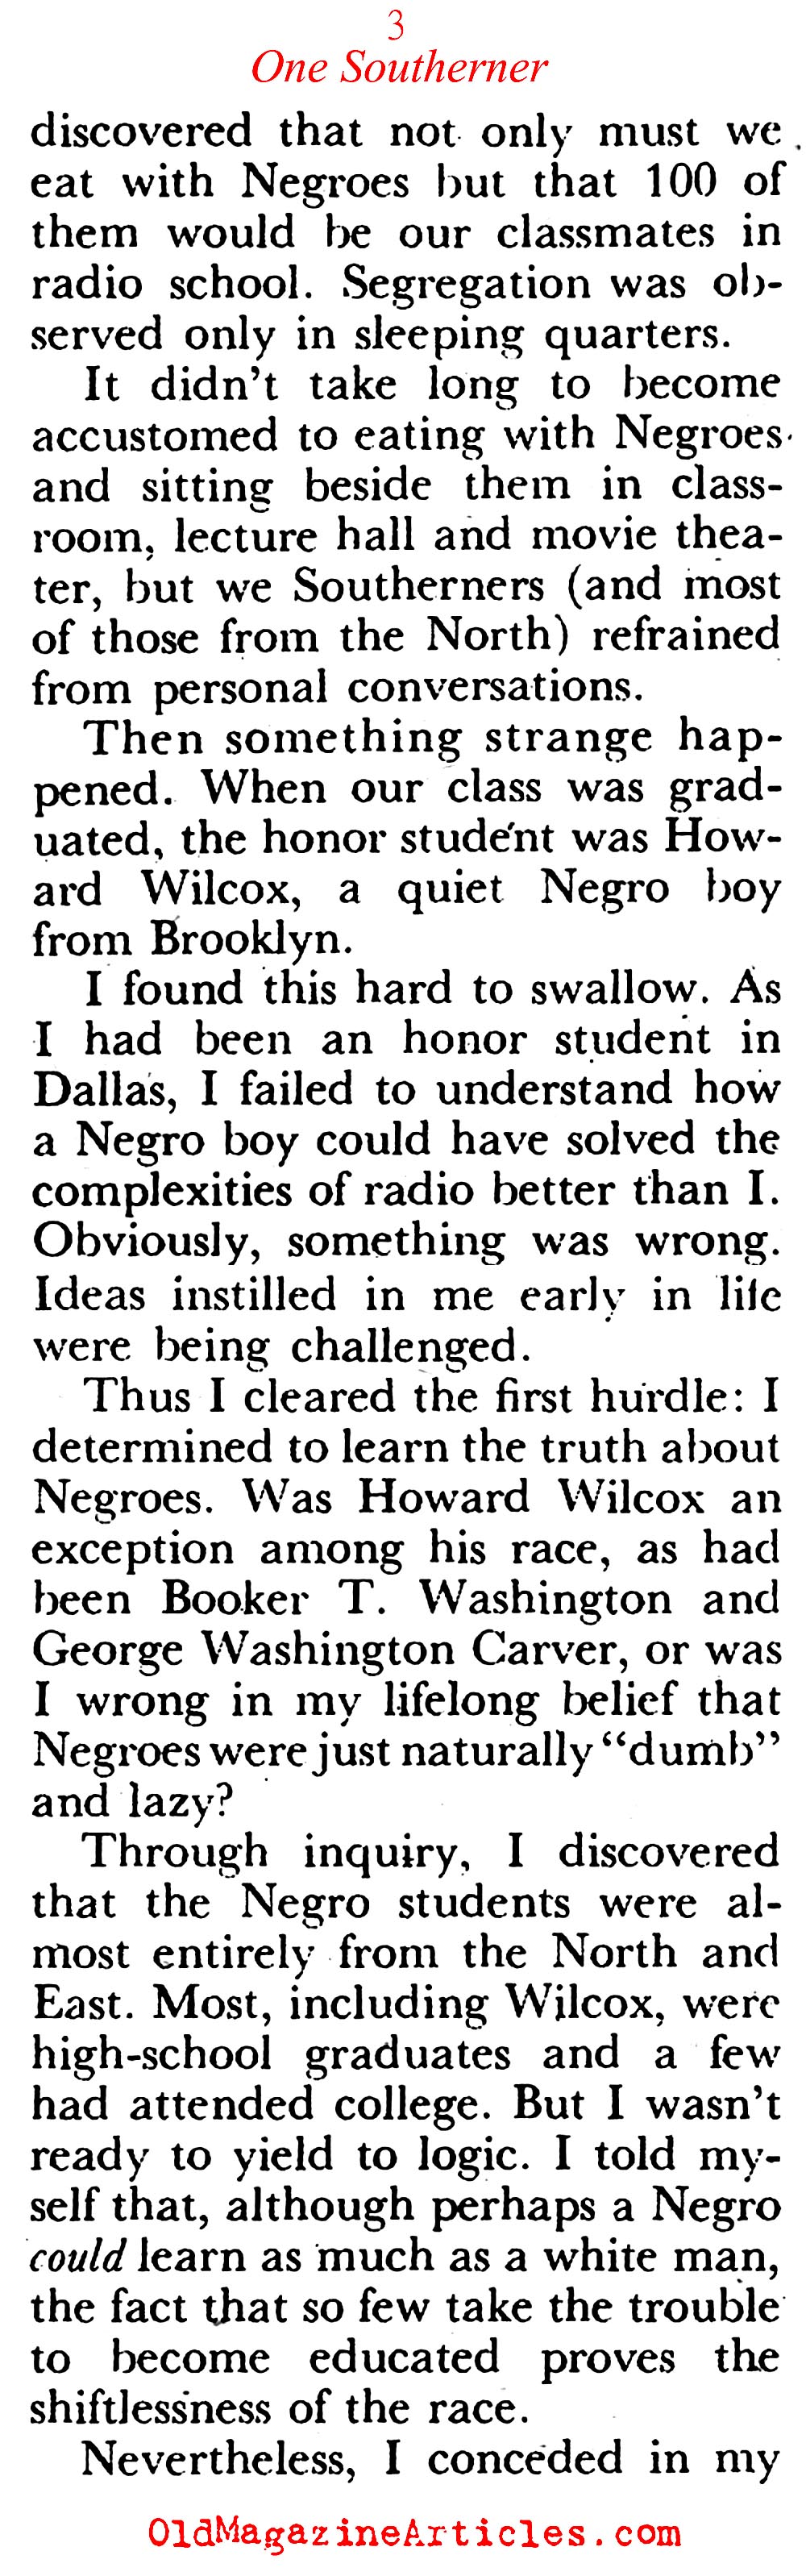 How One Southerner Overcame His Racist Attitudes  (Coronet Magazine, 1948)